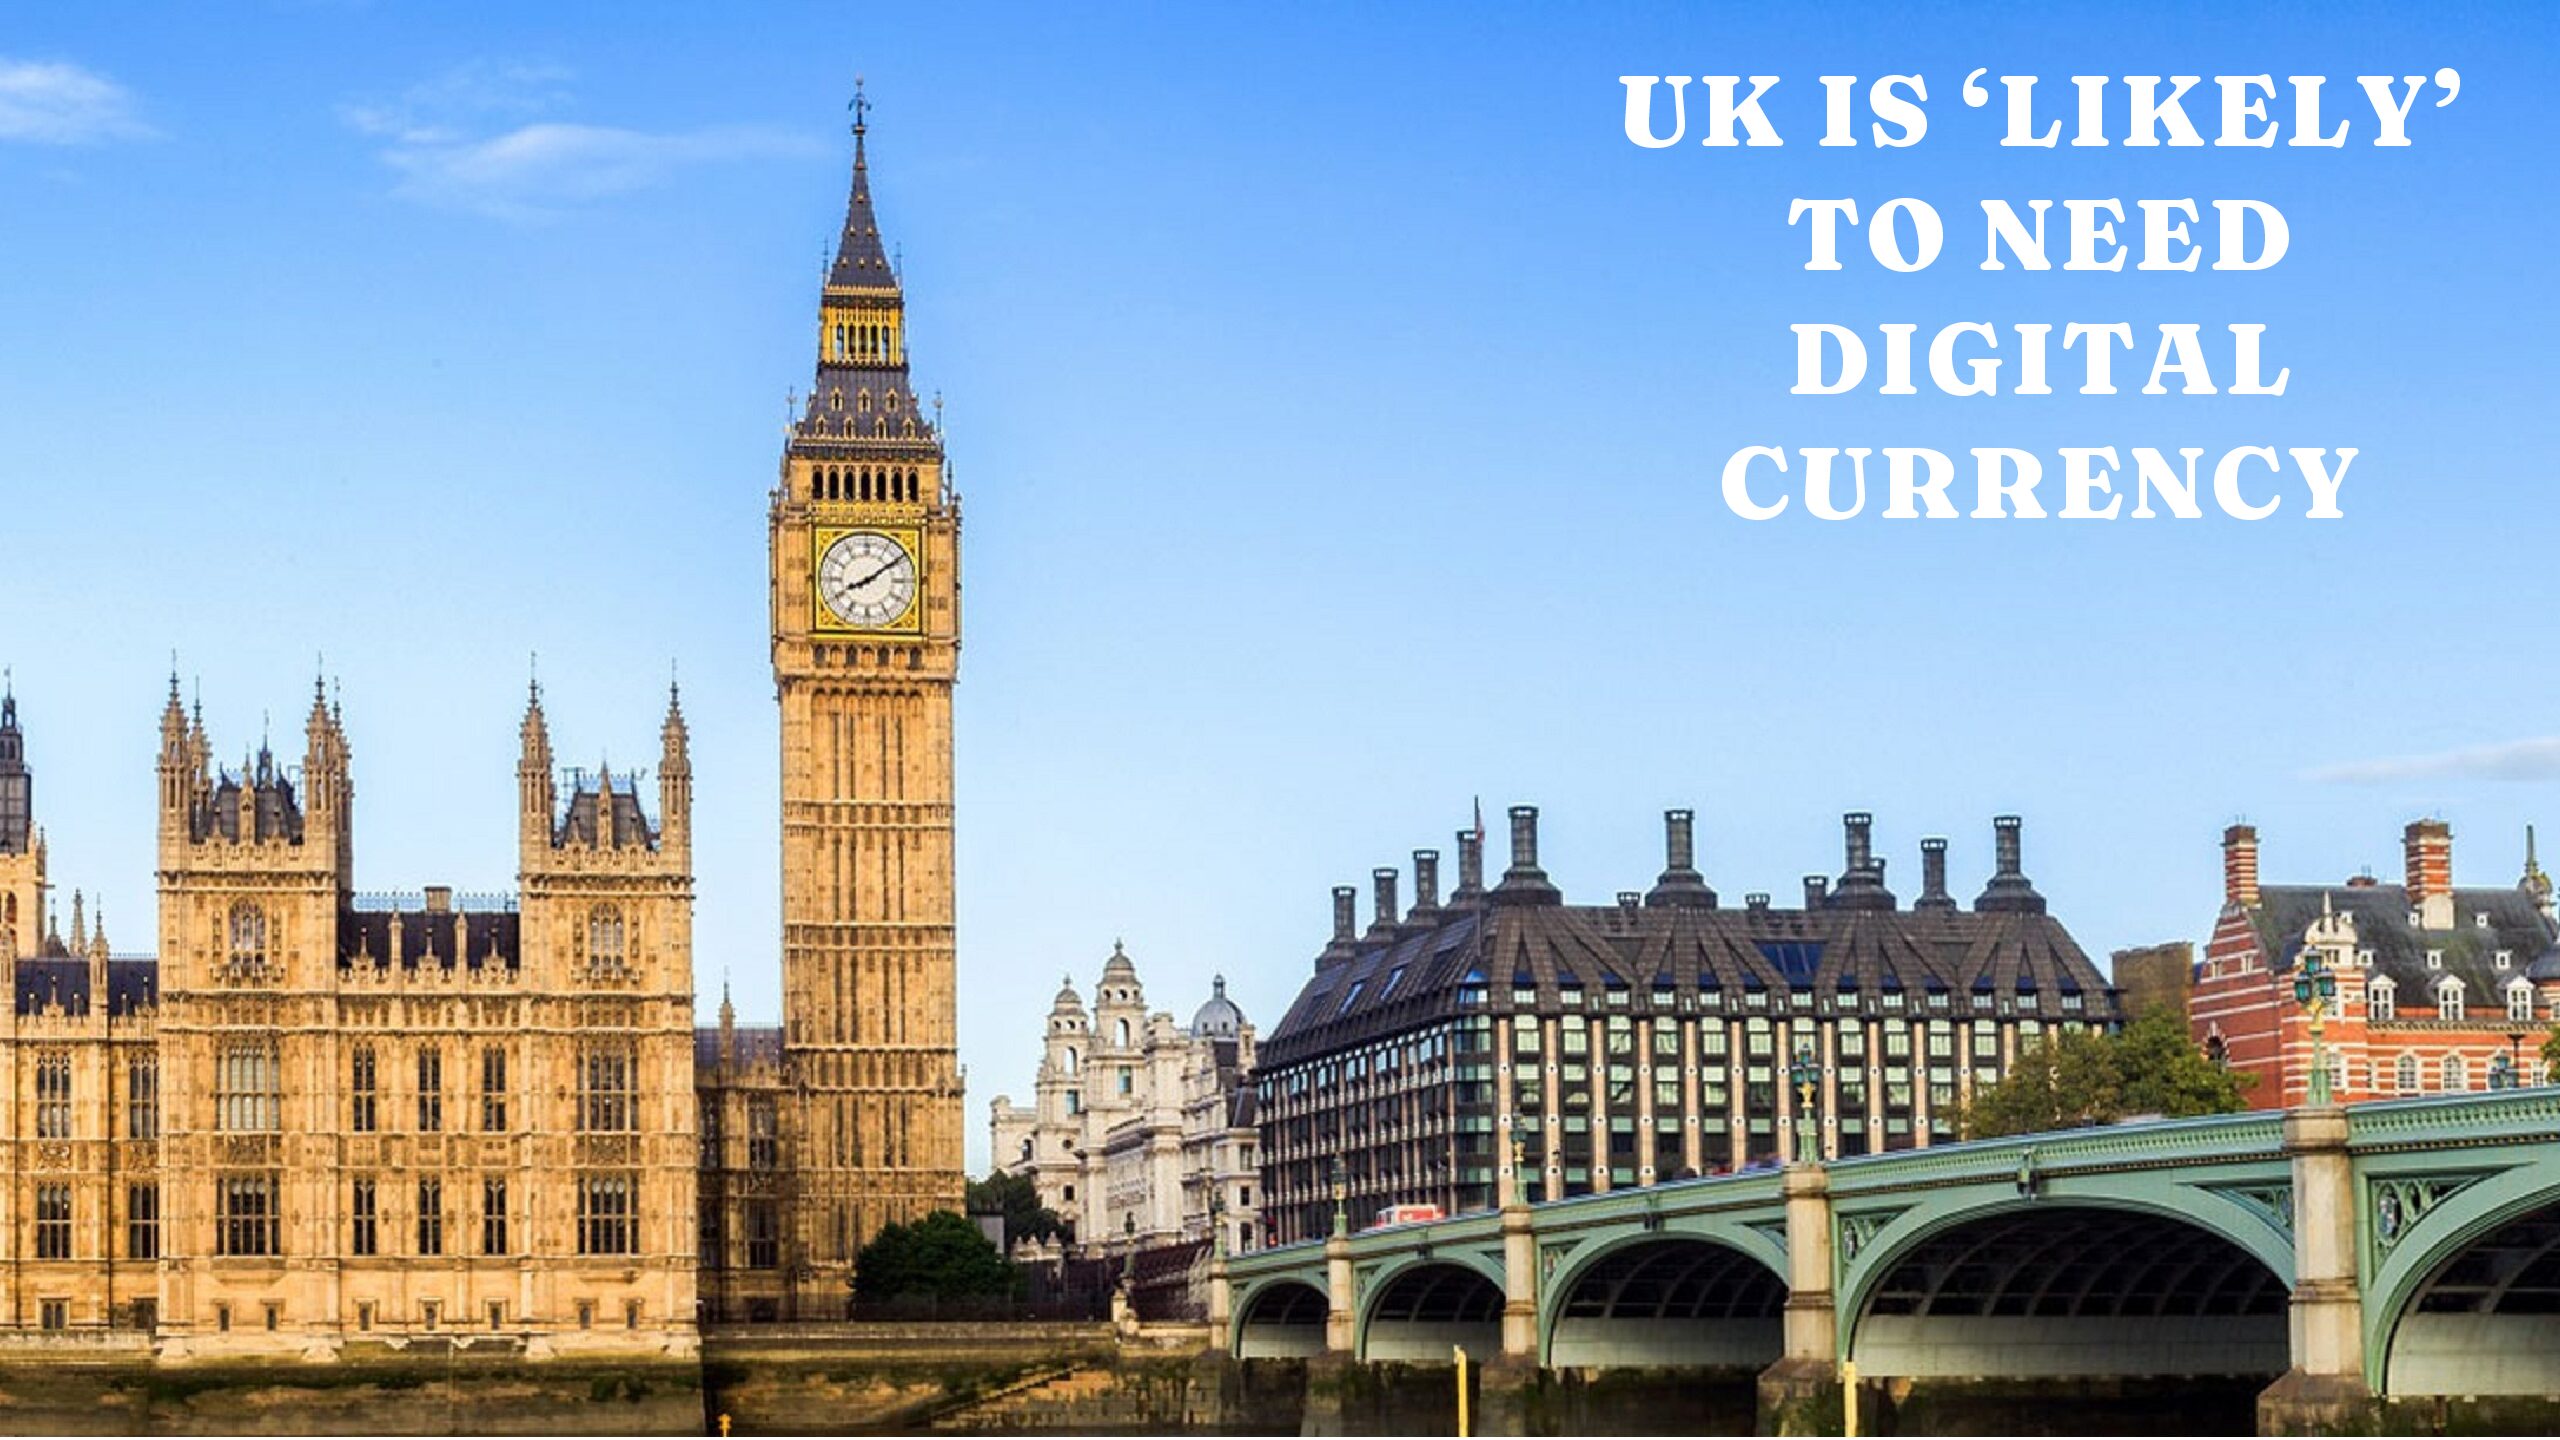 Report predicts probable need for digital currency in the UK according to Bank of England and Treasury